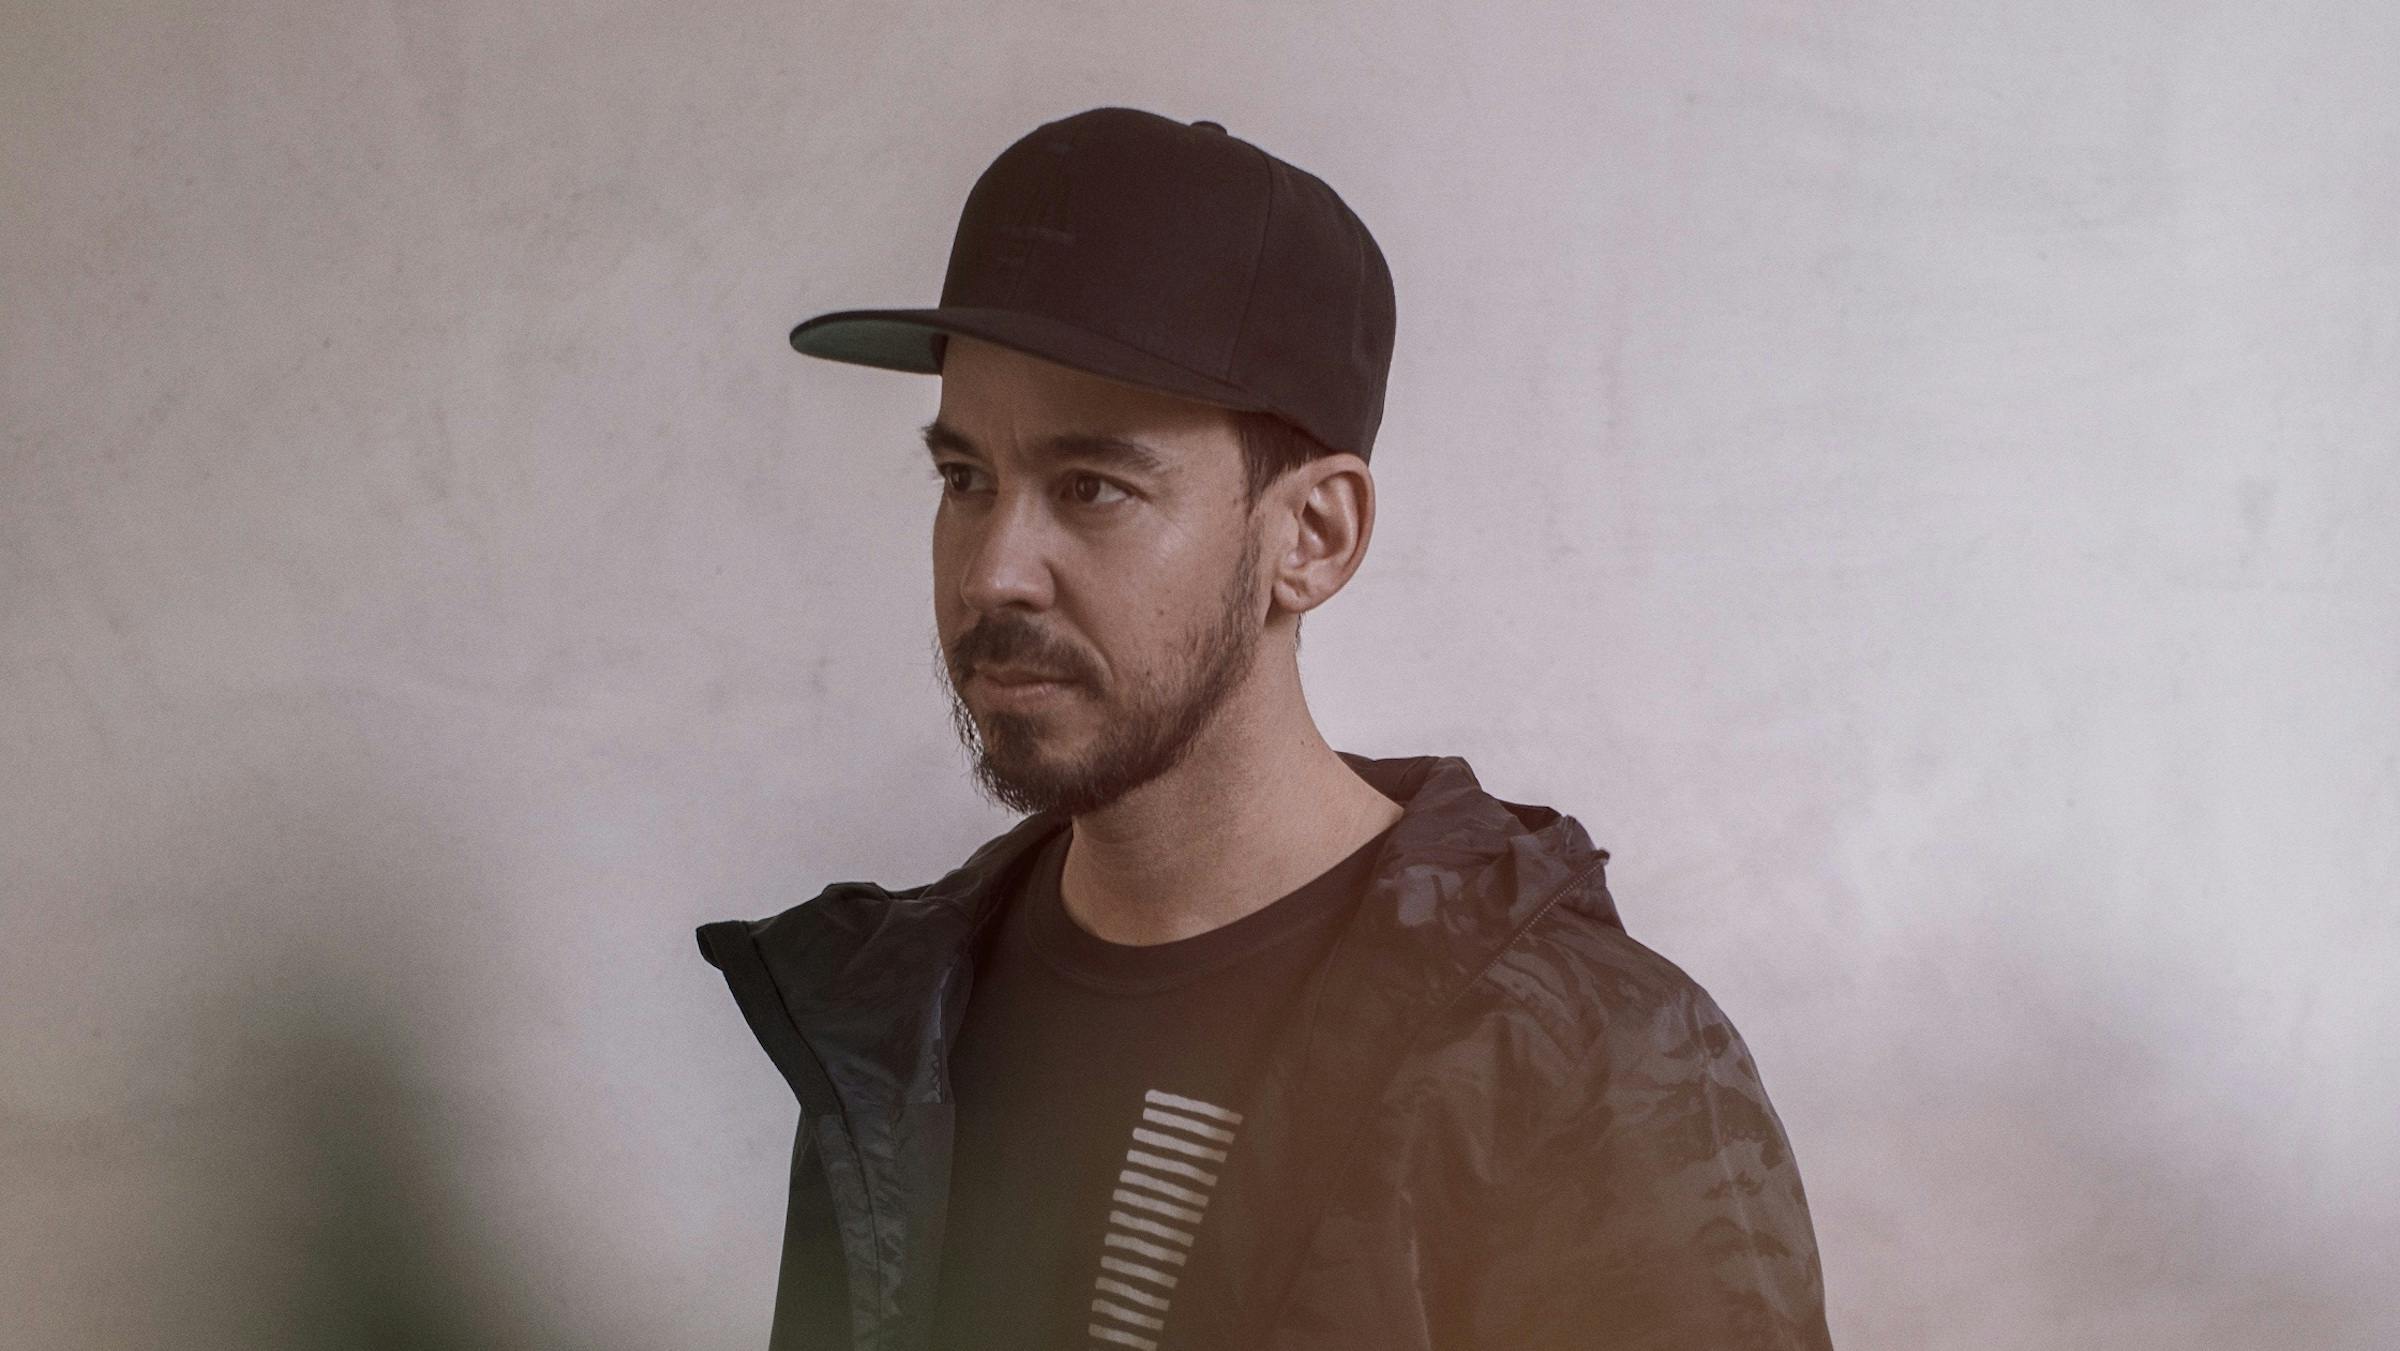 Mike Shinoda Will Be Releasing Dropped Frames, Vol. 2 This Week